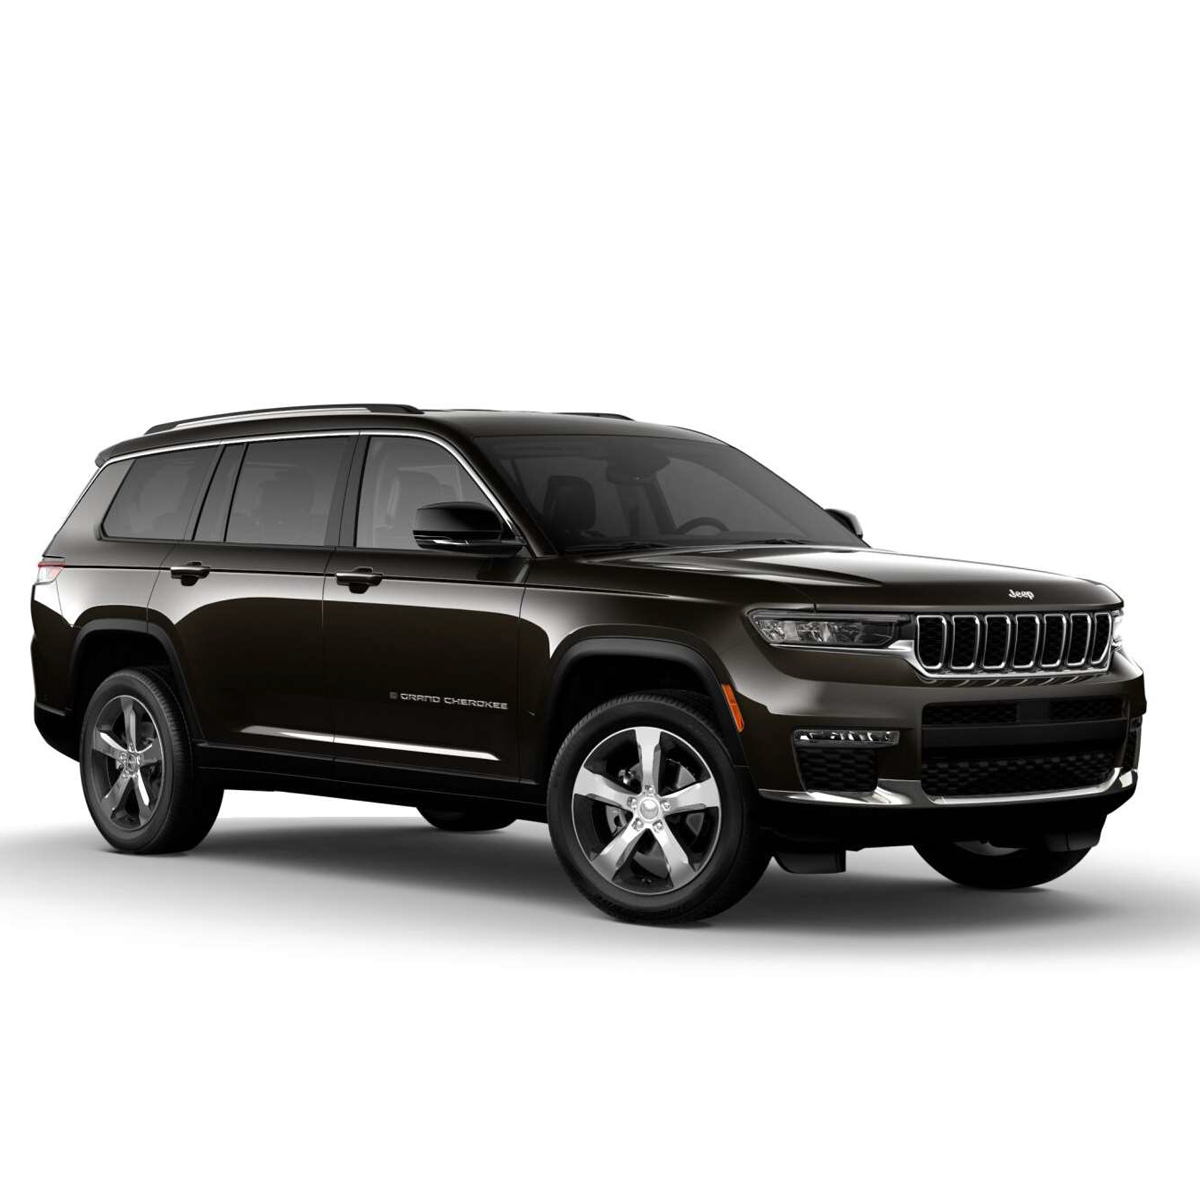  GRAND CHEROKEE L LIMITED 4X4 ROCKY MOUNTAIN PEARL COAT Exterior 2